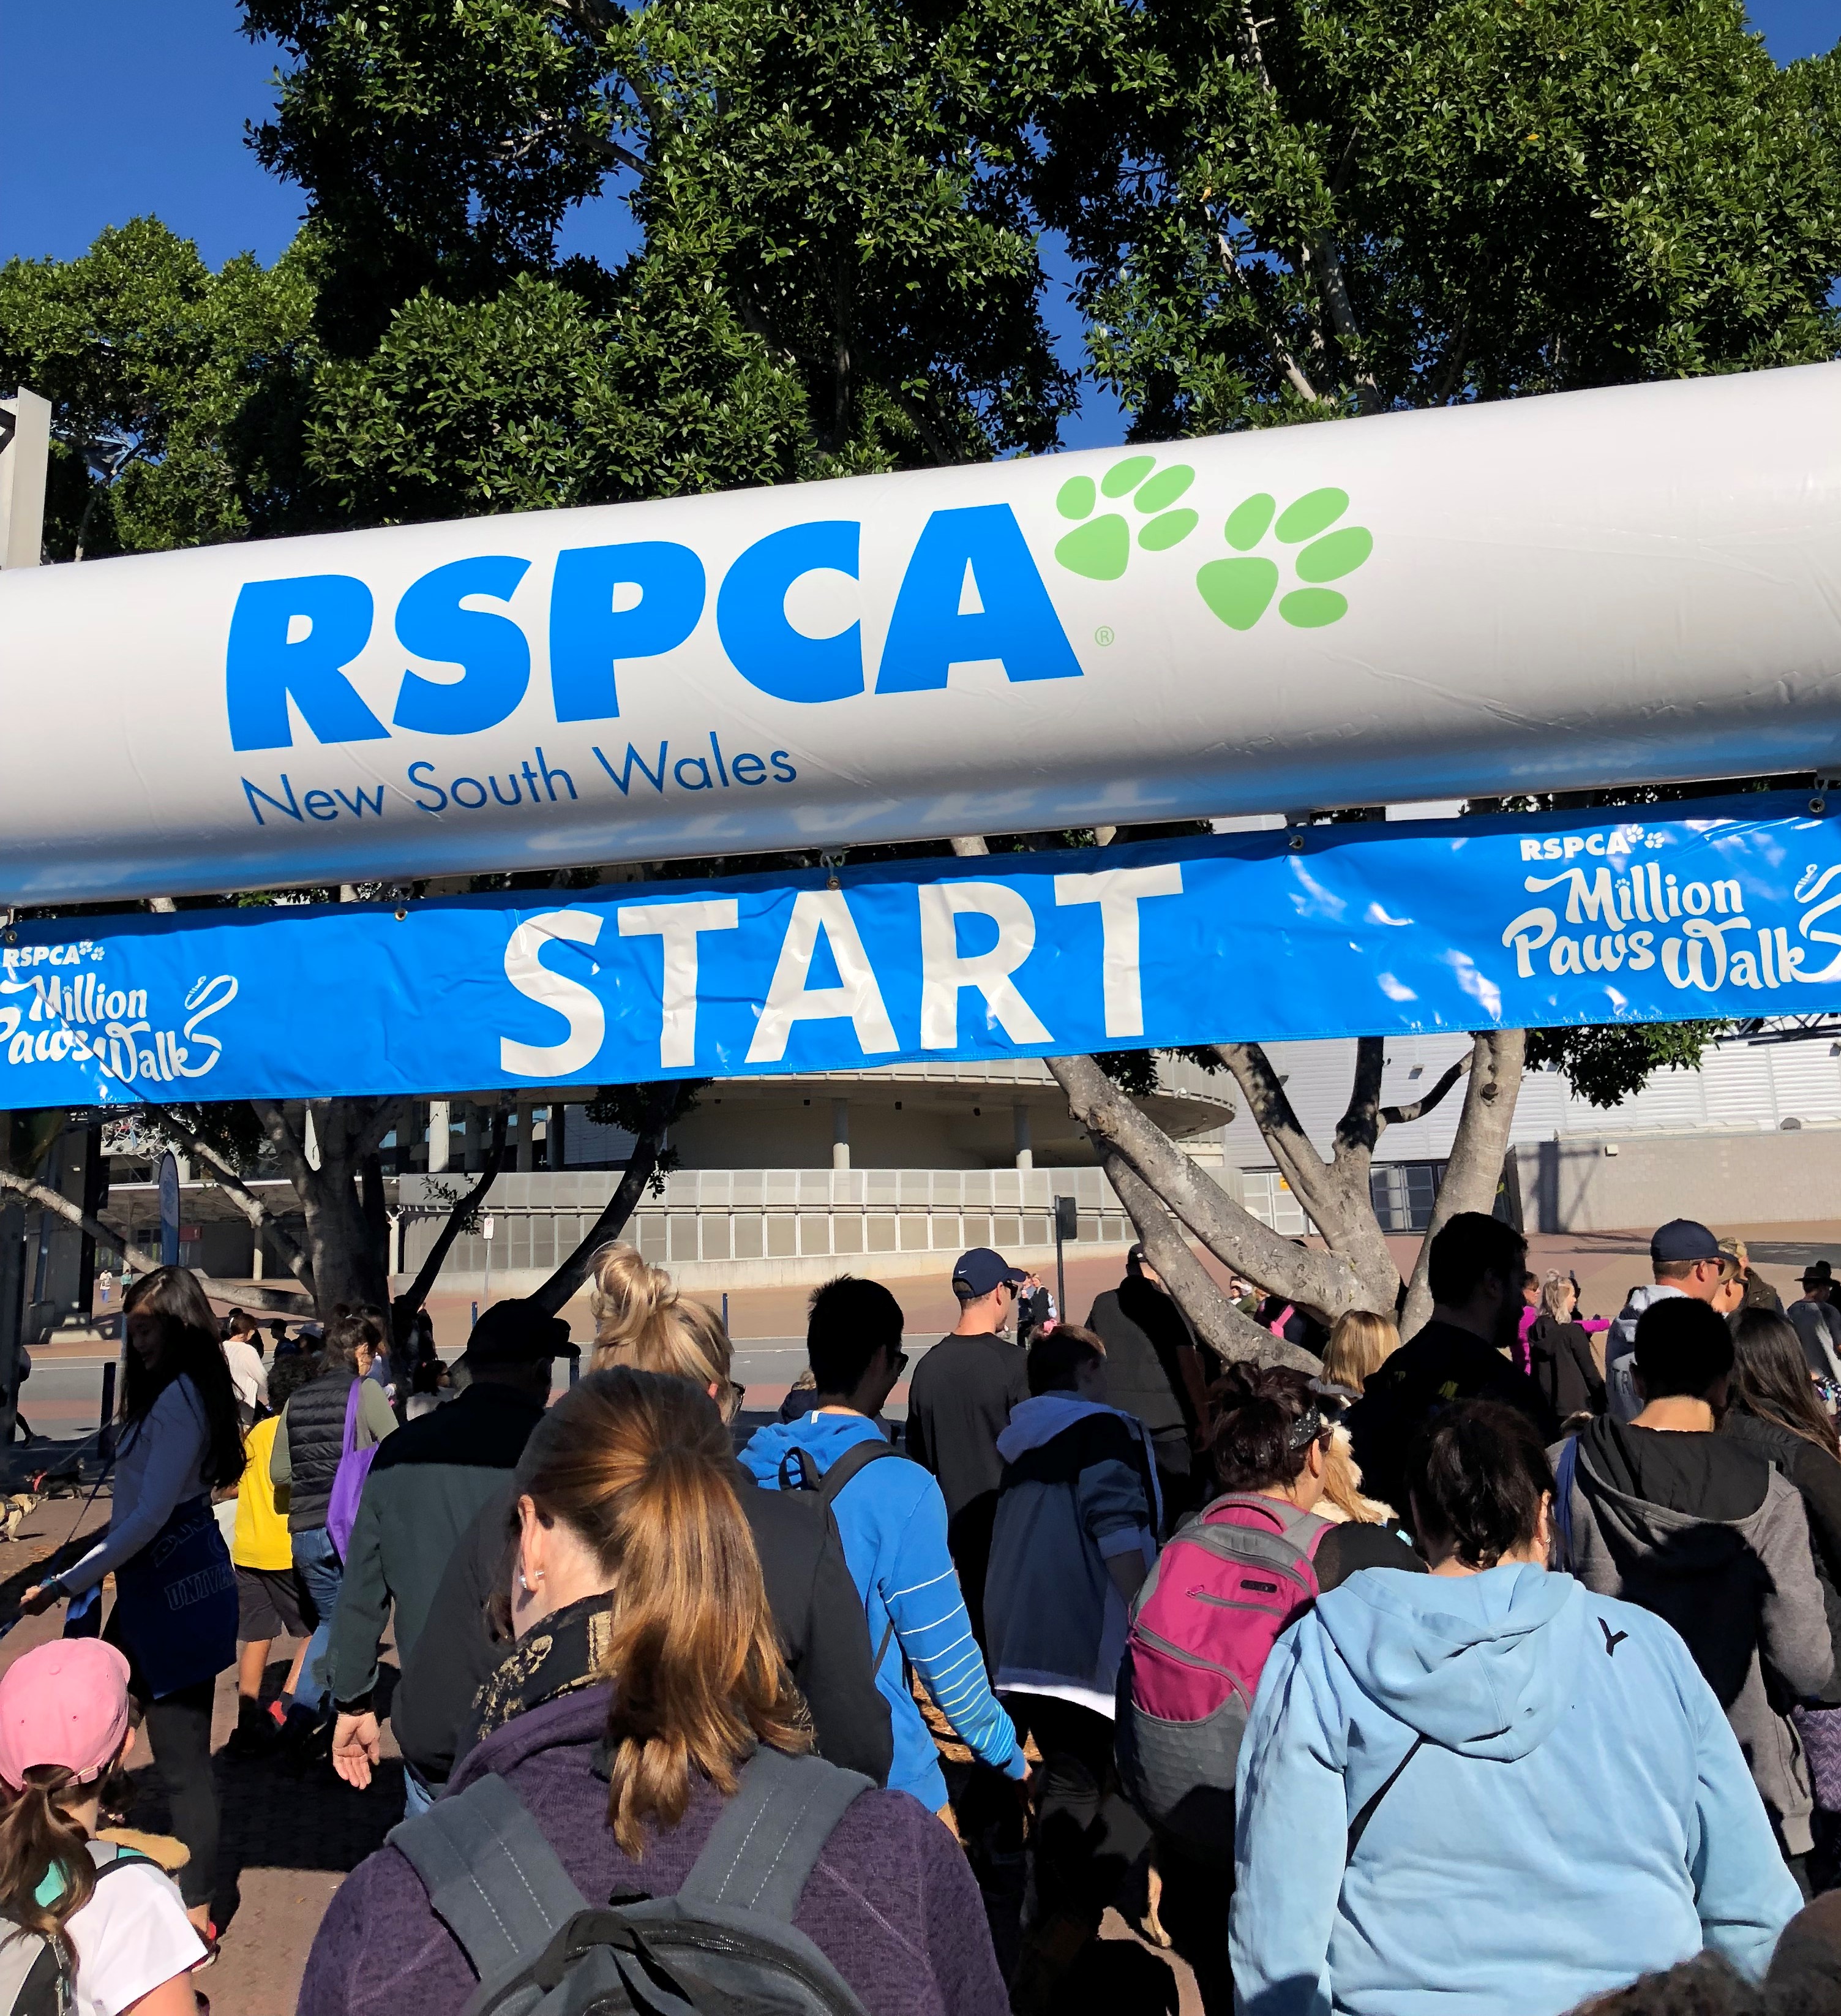 Vetnex is to Participate RSPCA’s Million Paws Walk 2019 on the 19th of May at Sydney Olympic Park